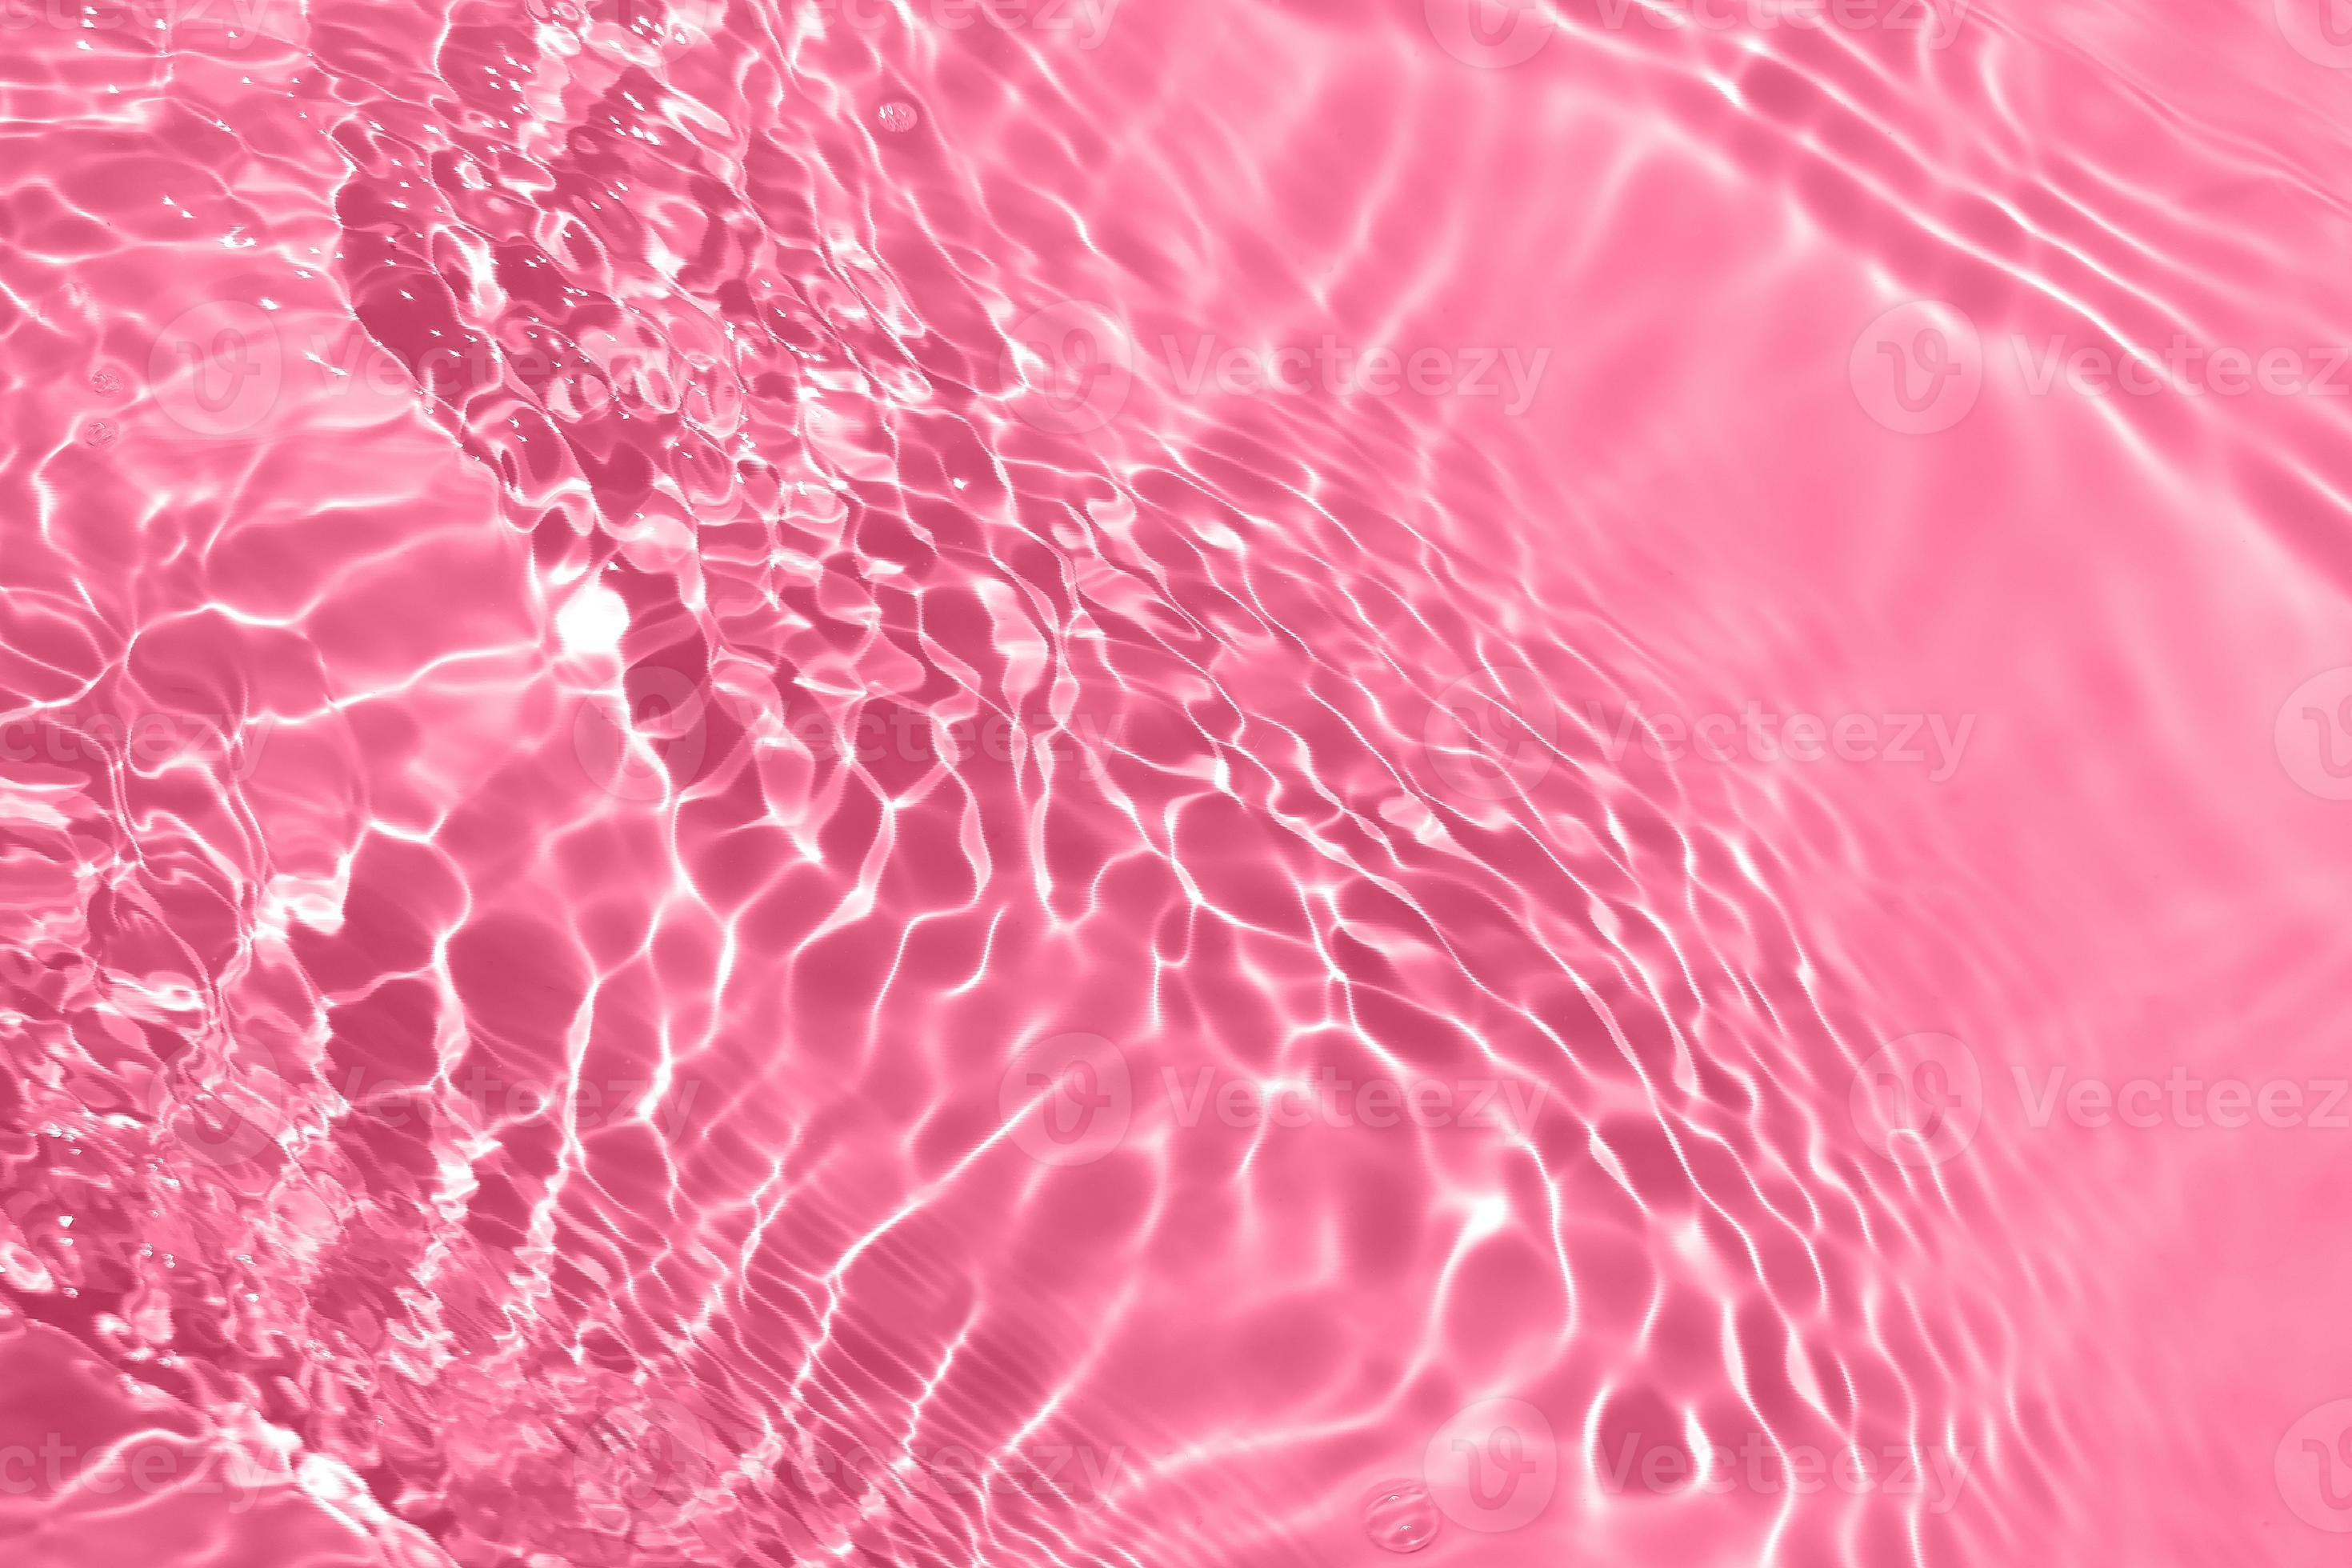 https://static.vecteezy.com/system/resources/previews/013/040/673/large_2x/defocus-blurred-transparent-pink-colored-clear-calm-water-surface-texture-with-splash-bubble-shining-pink-water-ripple-background-surface-of-water-in-swimming-pool-pink-bubble-water-shining-photo.jpg